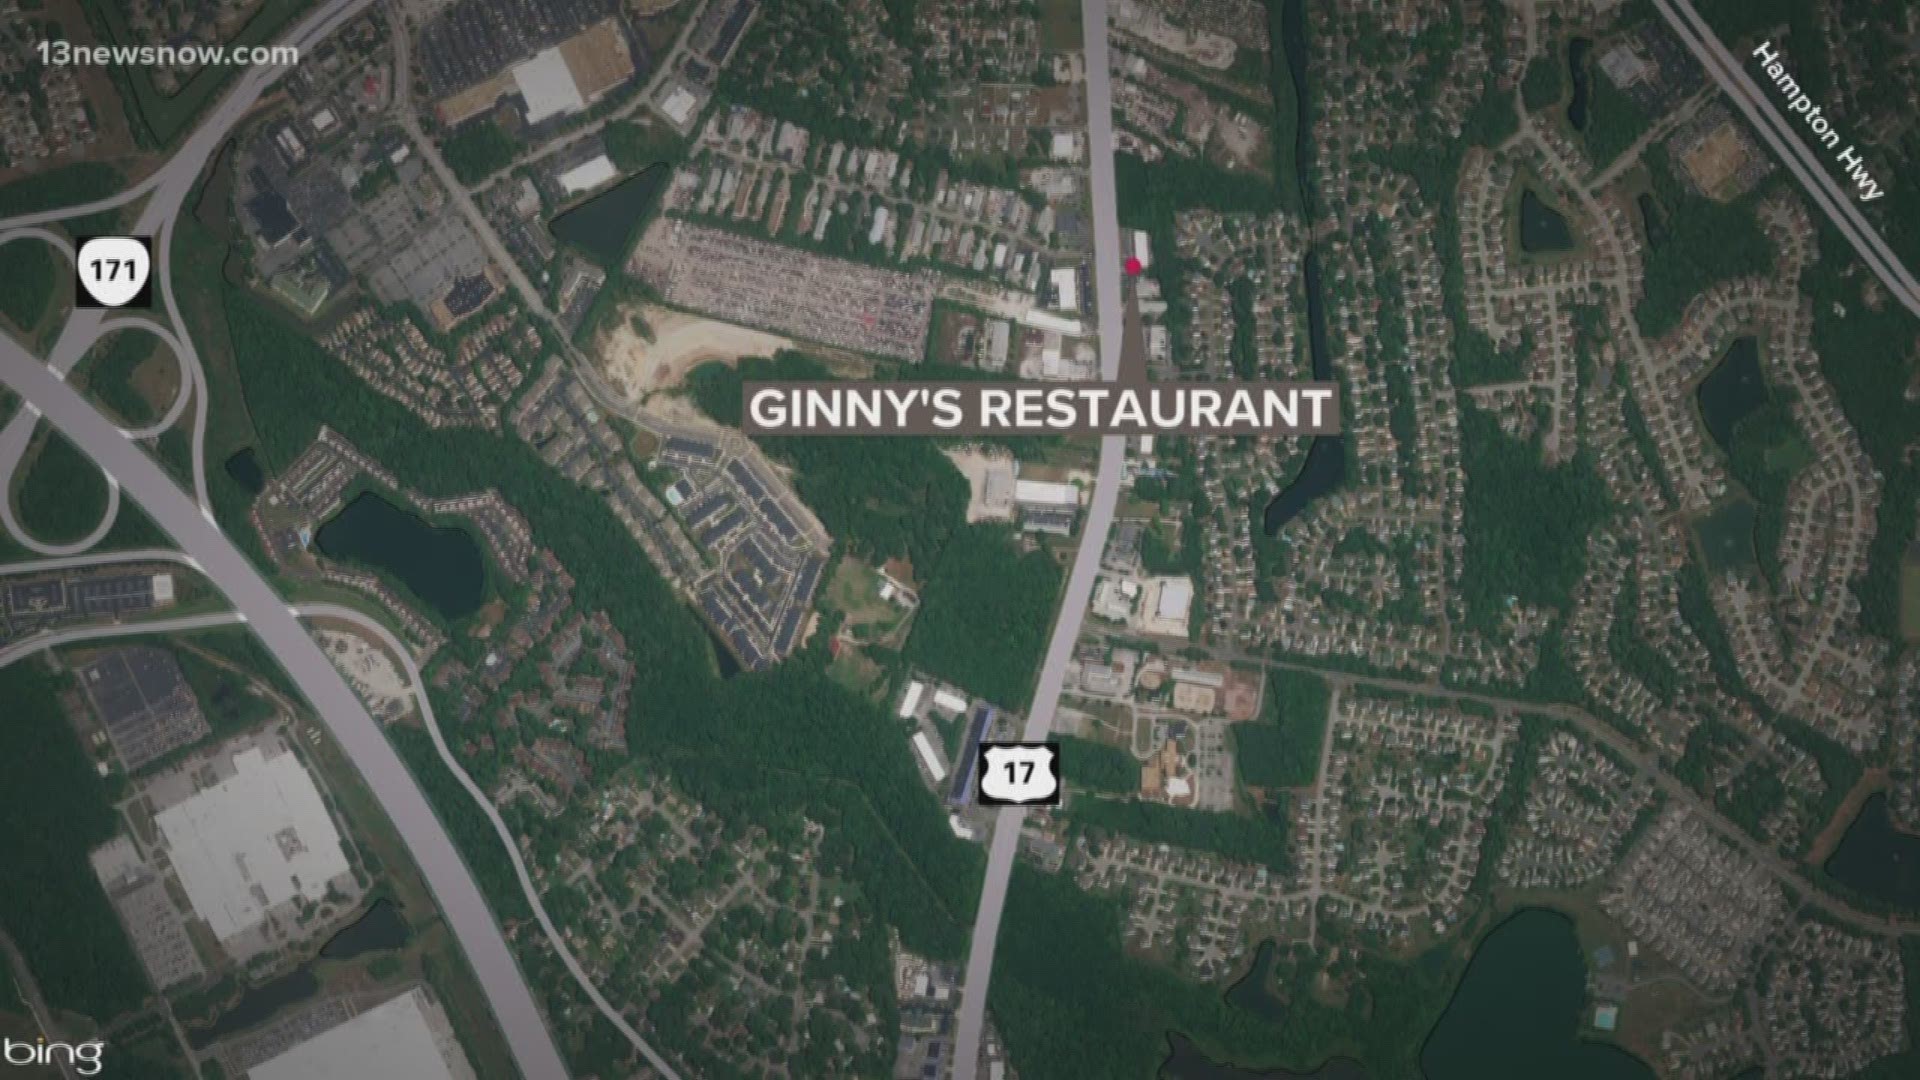 Just three weeks after the Peninsula Health District warned about a possible hepatitis A exposure at two Newport News restaurants, they've released another warning, this time in Yorktown. Officials issued an alert Thursday about an employee at Ginny's Restaurant on George Washington Memorial Highway in Yorktown who was recently diagnosed with Hepatitis A.